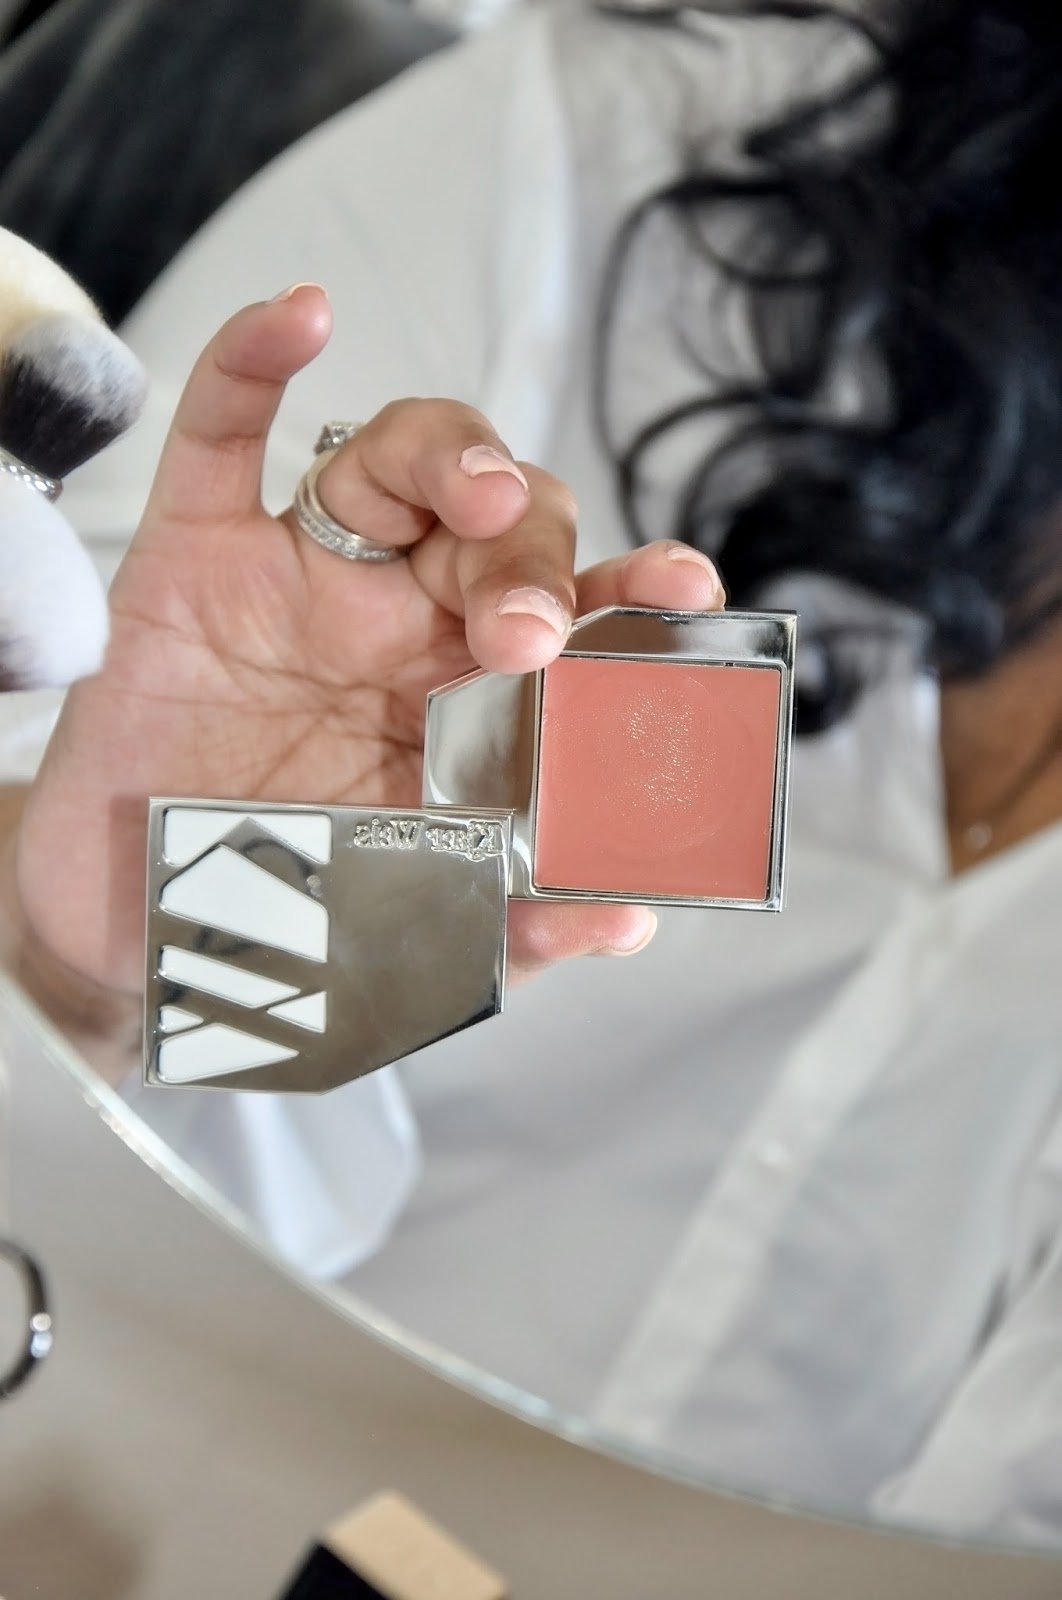 Kjaer Weis Sun Touched Cream Blush Review